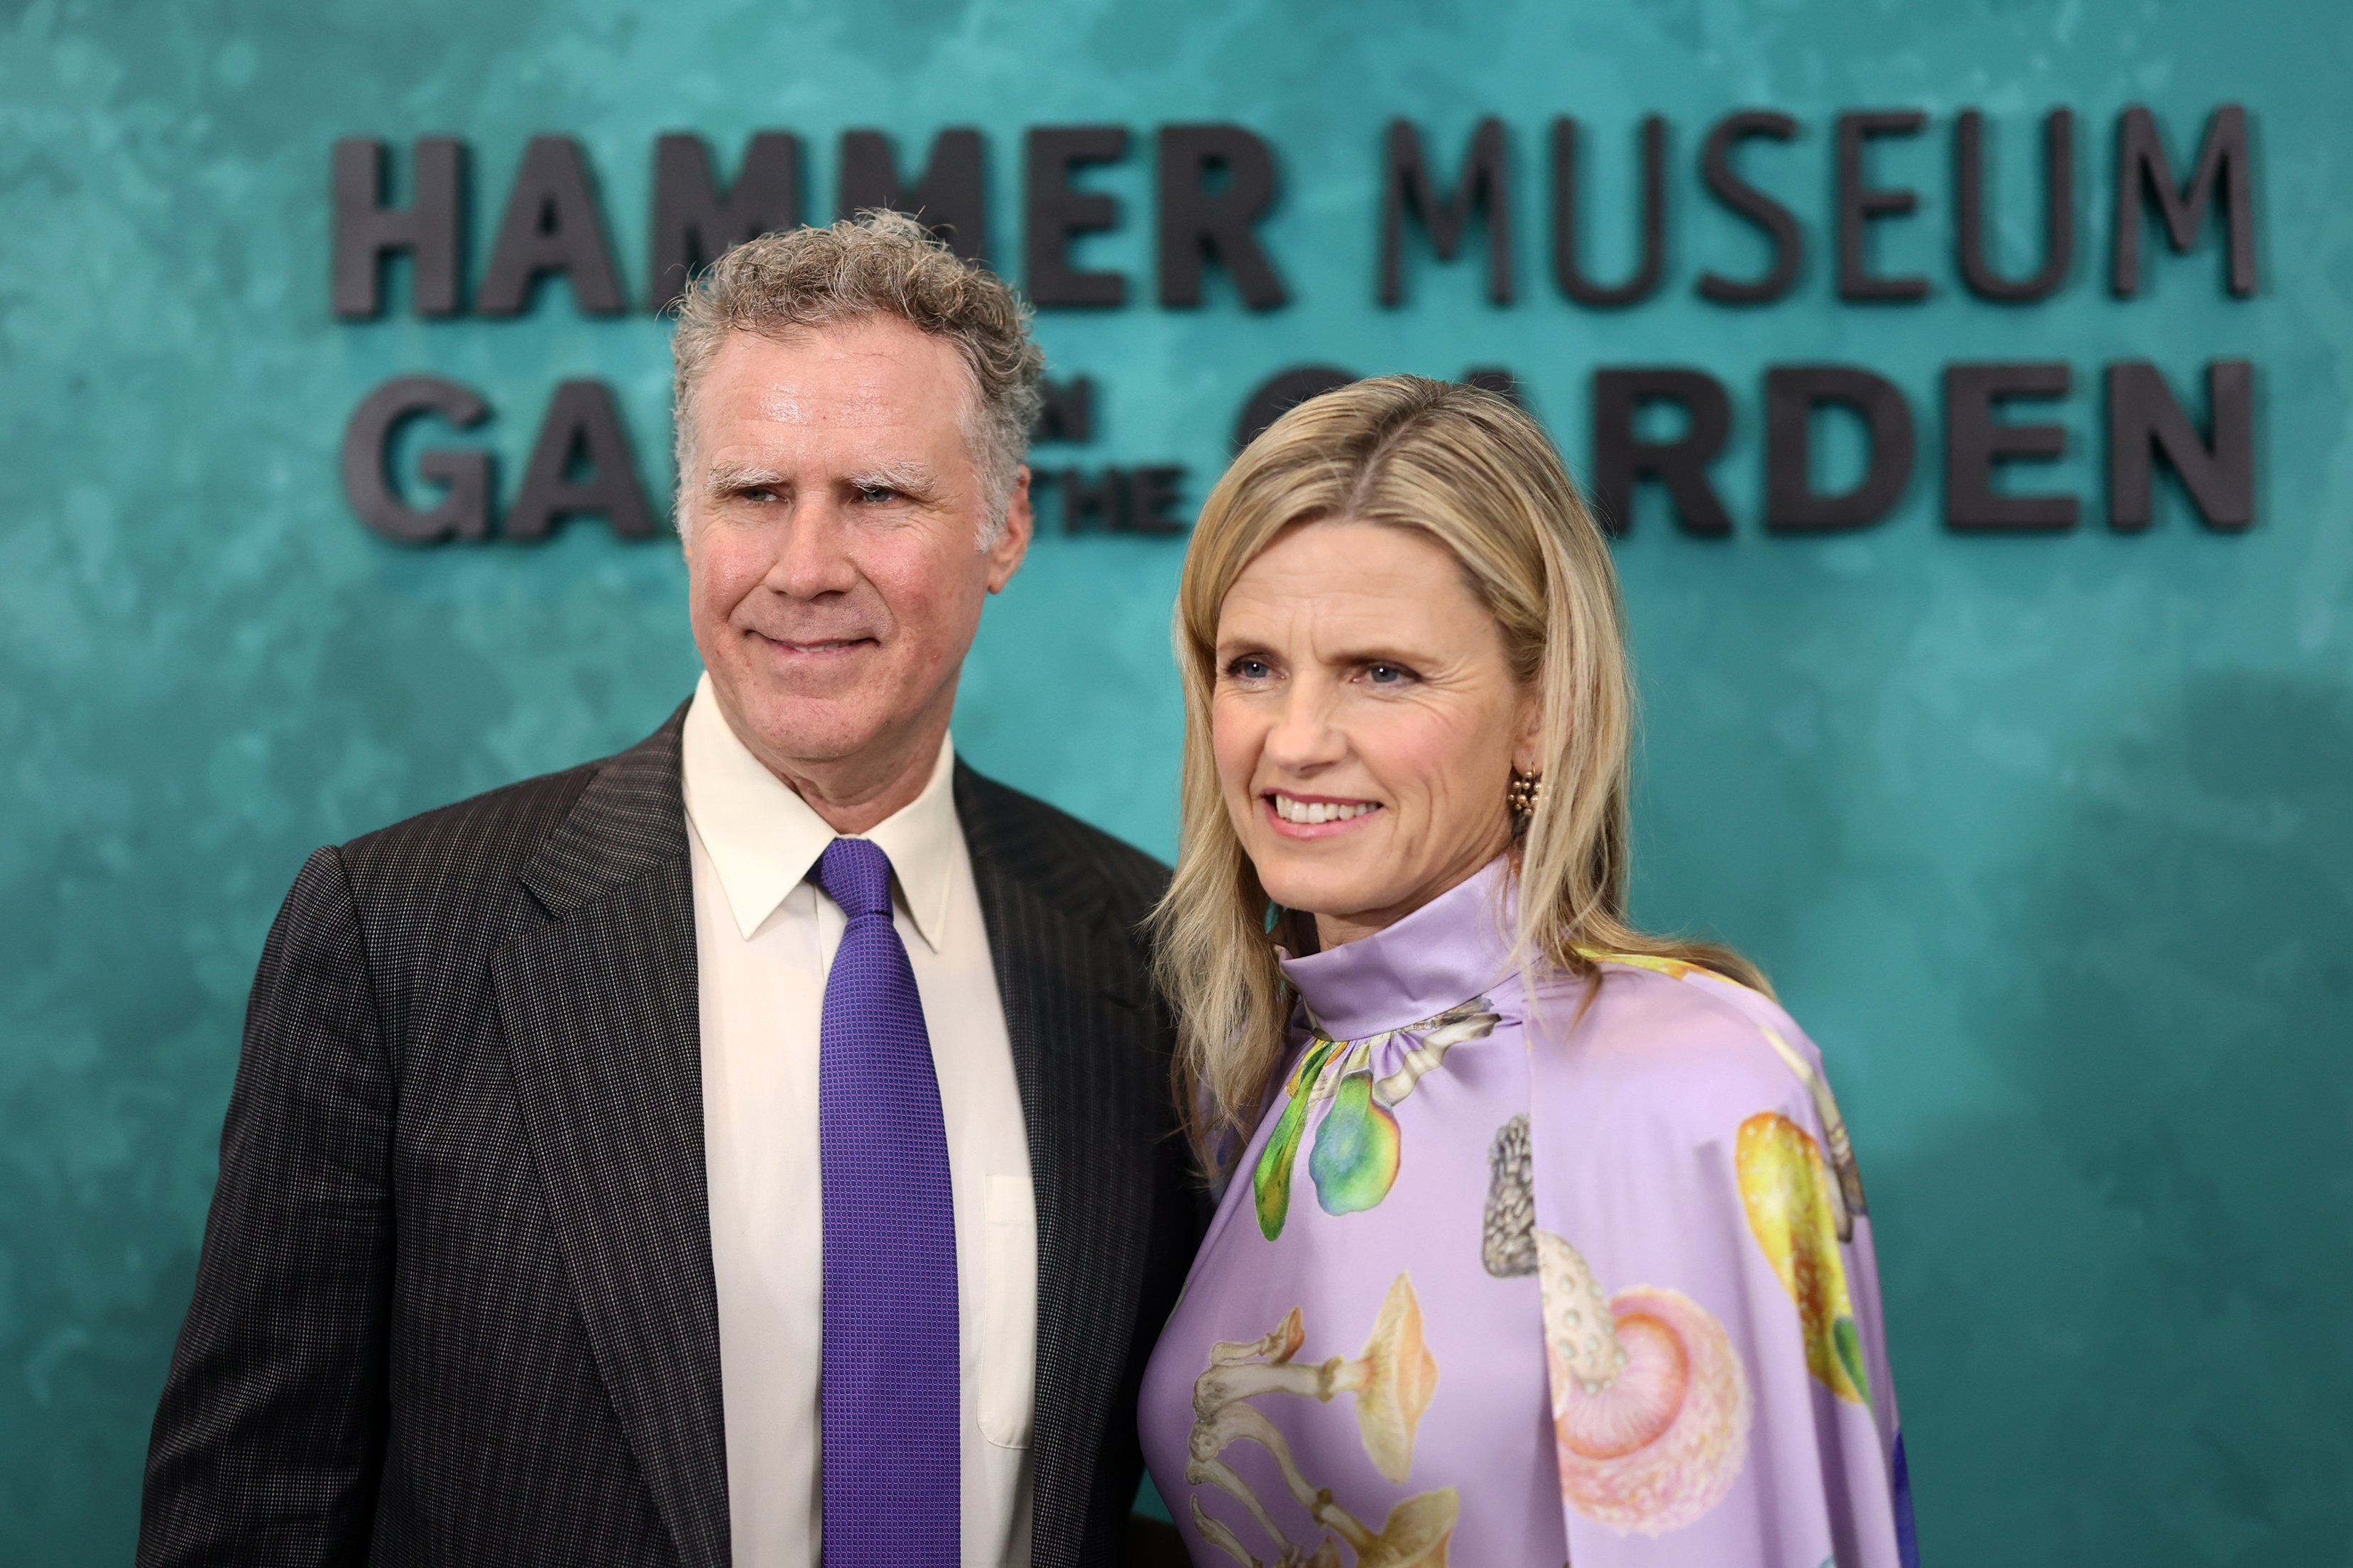 Will Ferrell and Viveca Paulin during Hammer Museum's 18th Annual Gala in the Garden on October 08, 2022, in Los Angeles, California. | Source: Getty Images